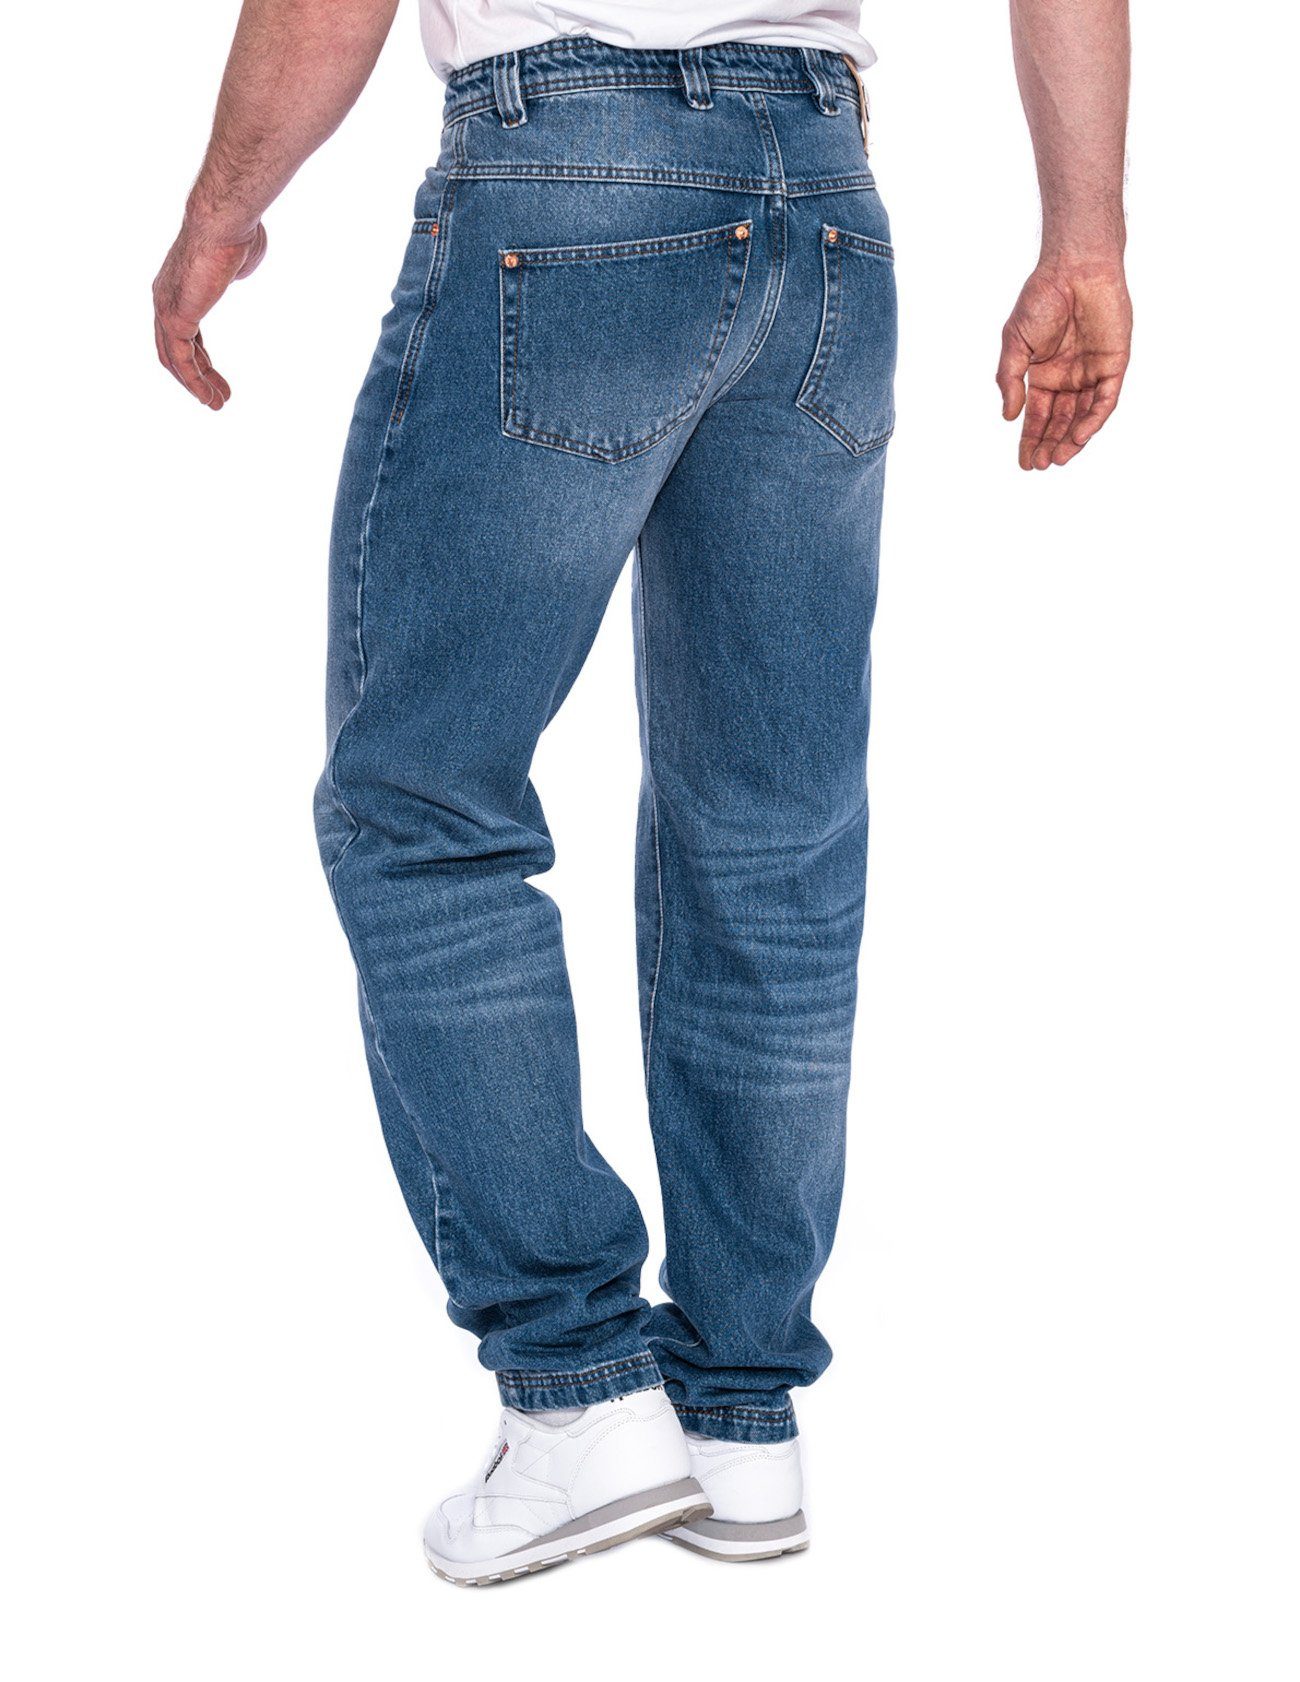 Fit, Zicco Loose Jeans Weite Maryland Relaxed Fit PICALDI 472 Jeans